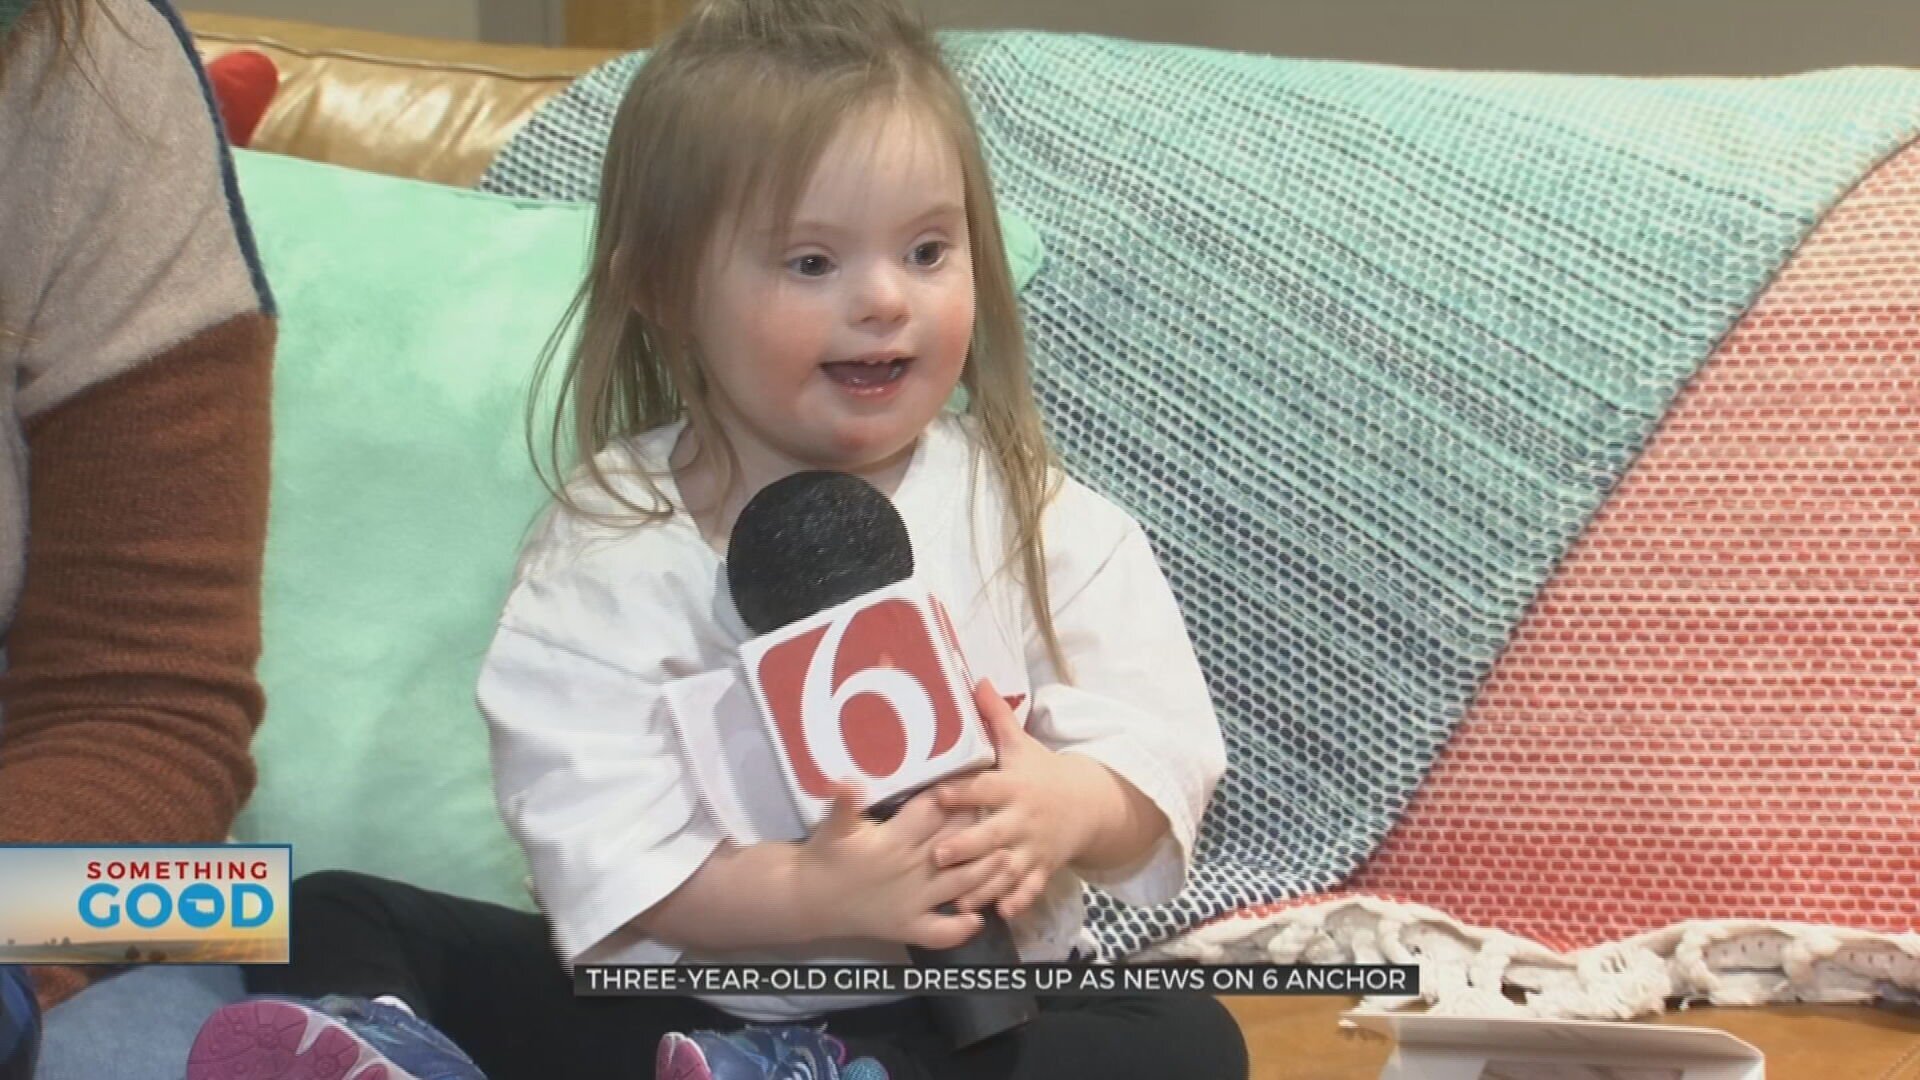 3-Year-Old Girl Joyfully Steals The Show Dressed As News On 6 Anchor 